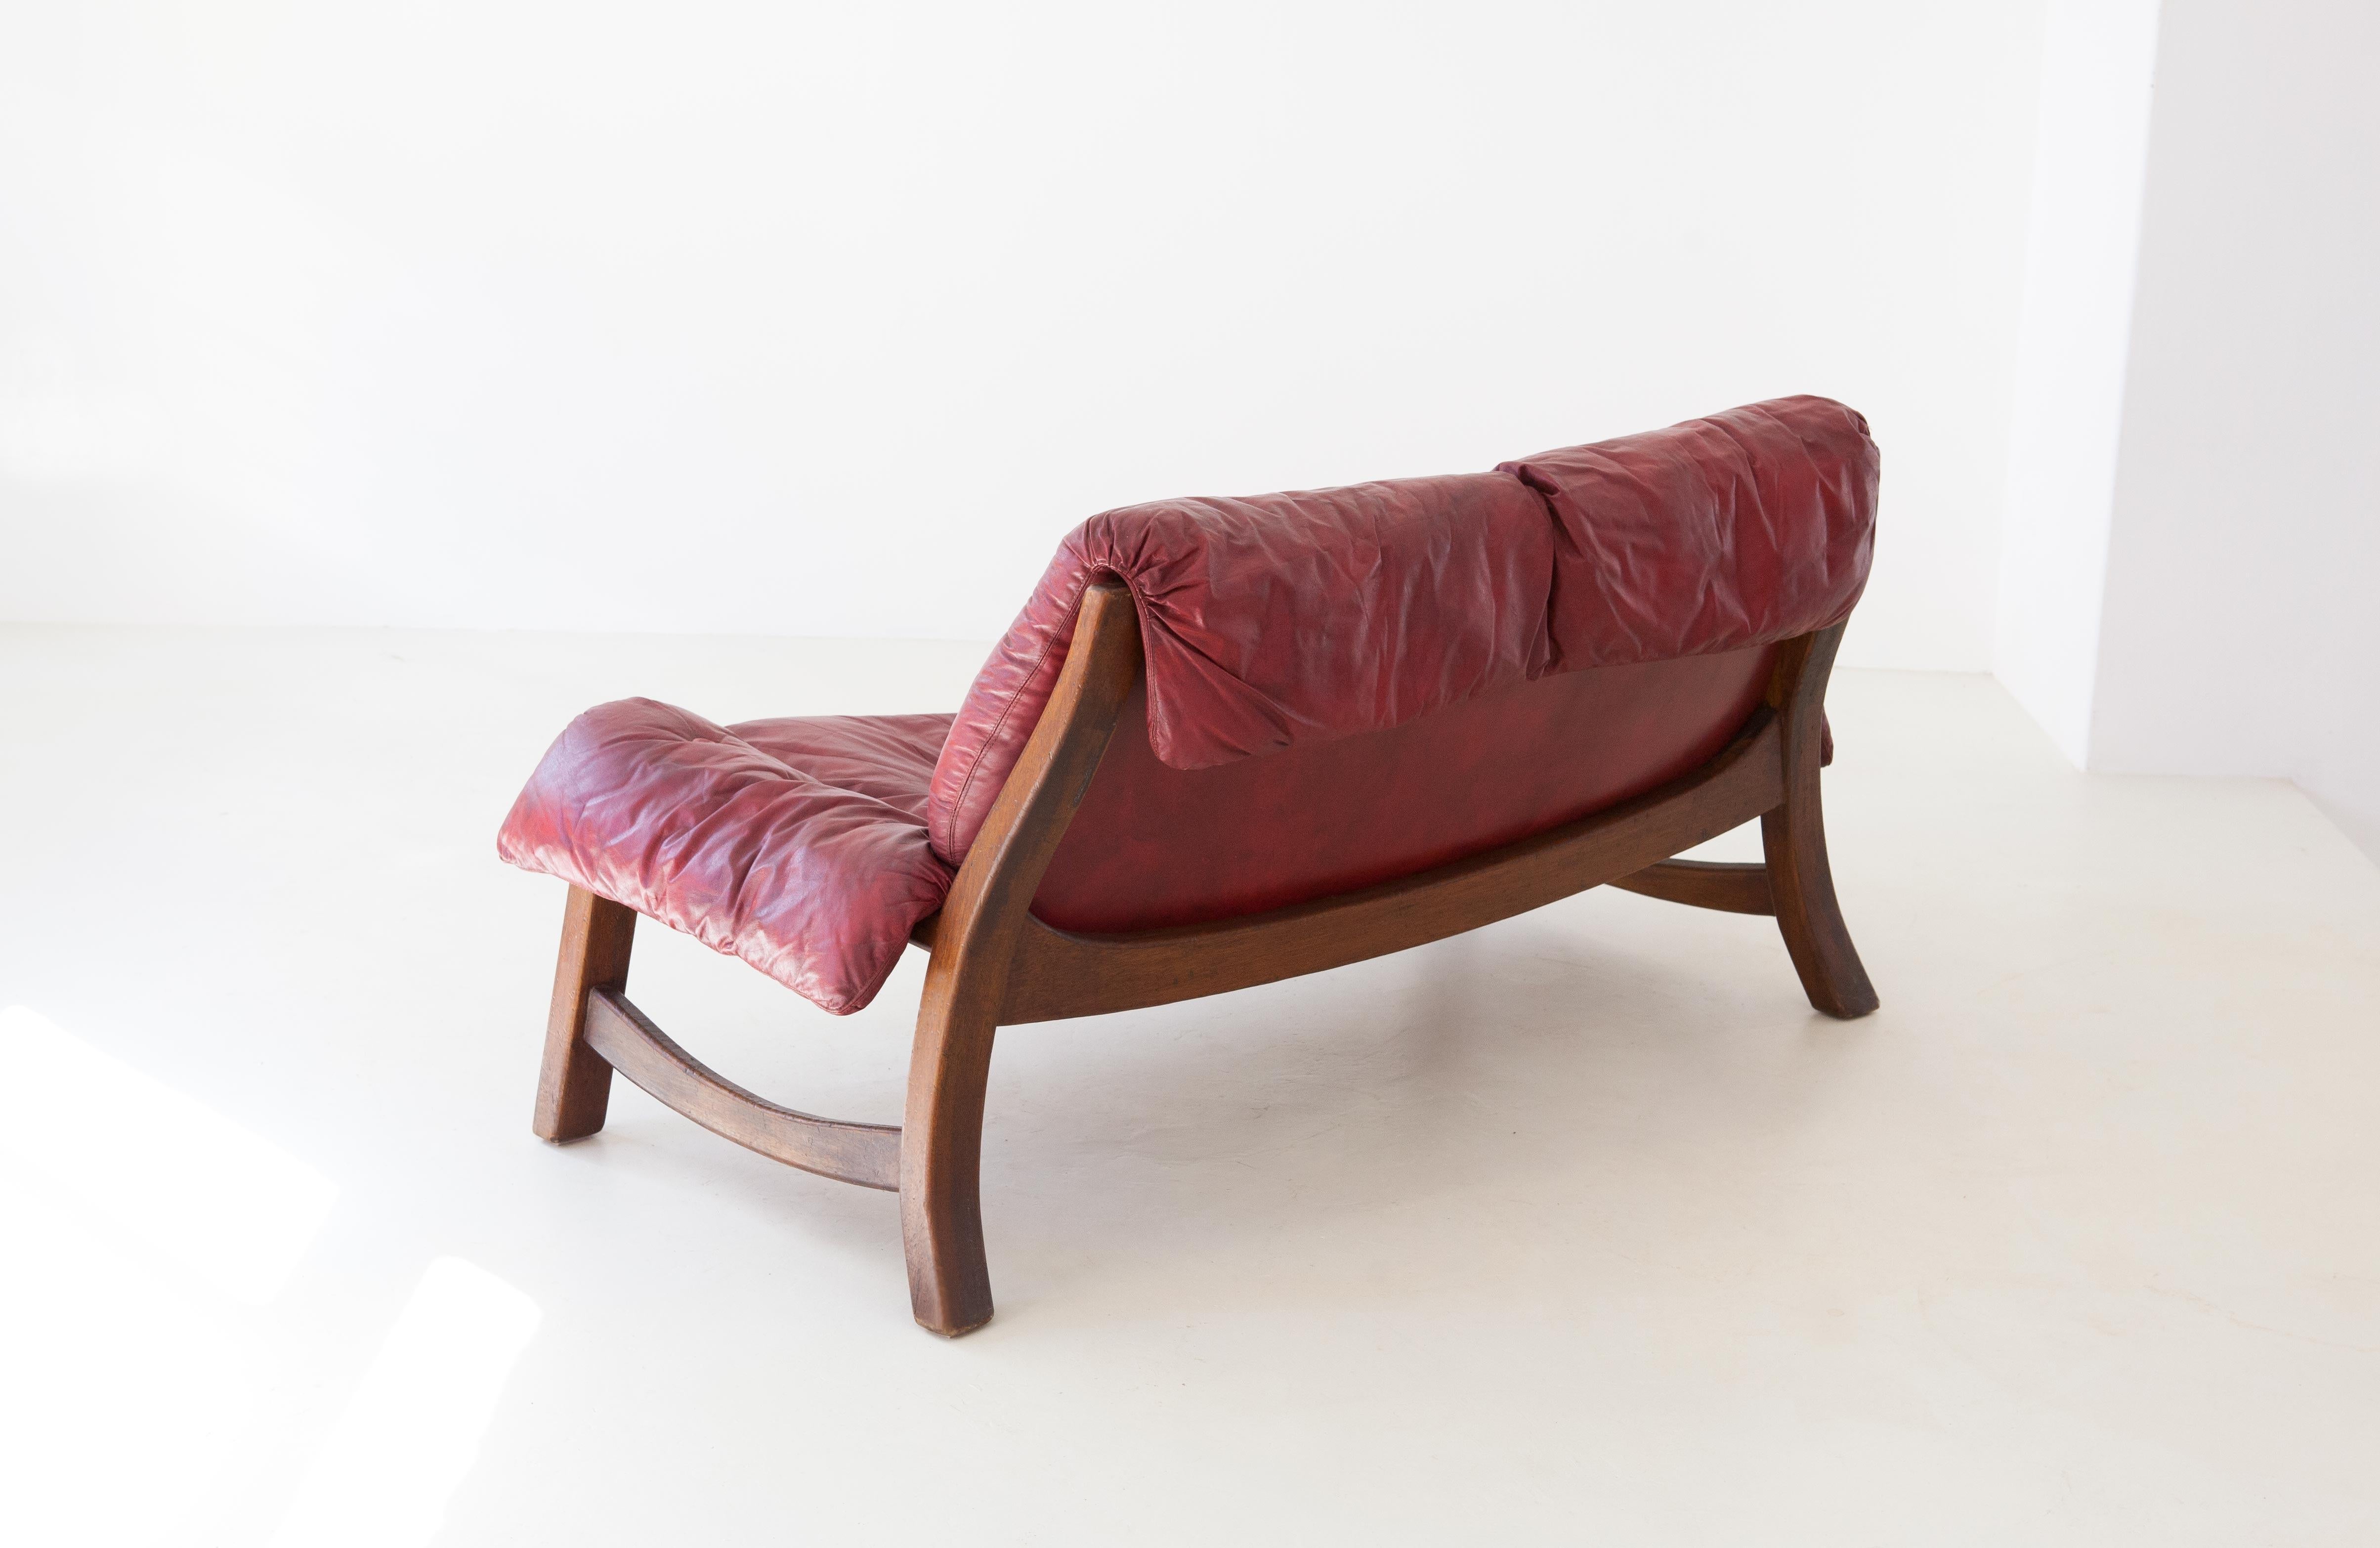 Mid-Century Modern canapé, designed and produced in Italy during the 1960s

In original conditions: the seat is comfortable and the leather and padding are in very good condition, without tears or particular defects.
The solid wood structure is